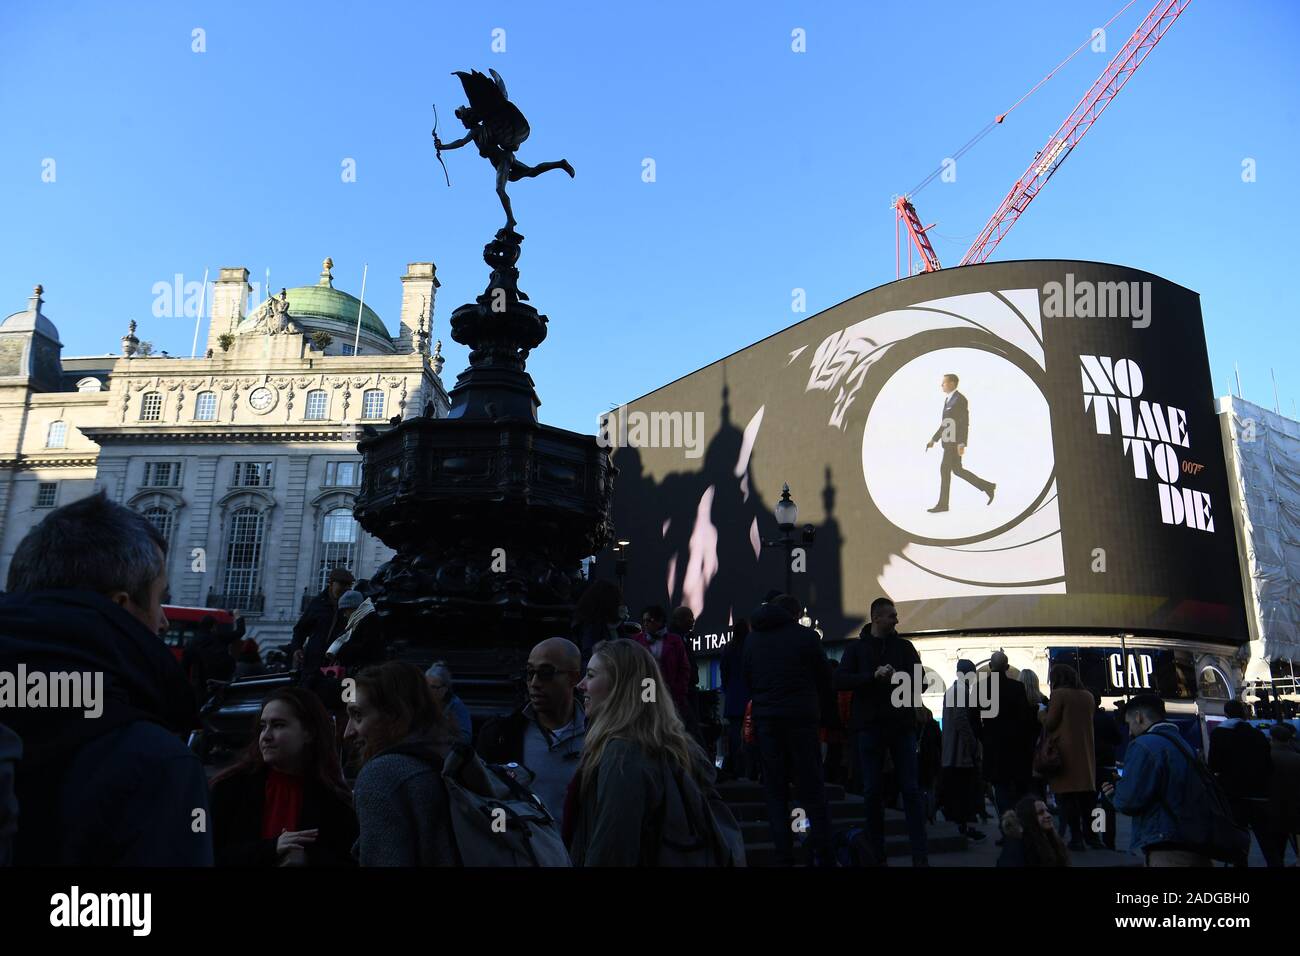 The trailer for the latest Bond film 'No Time to Die' is aired for the first time on the large screen in London's Piccadilly Circus. Stock Photo